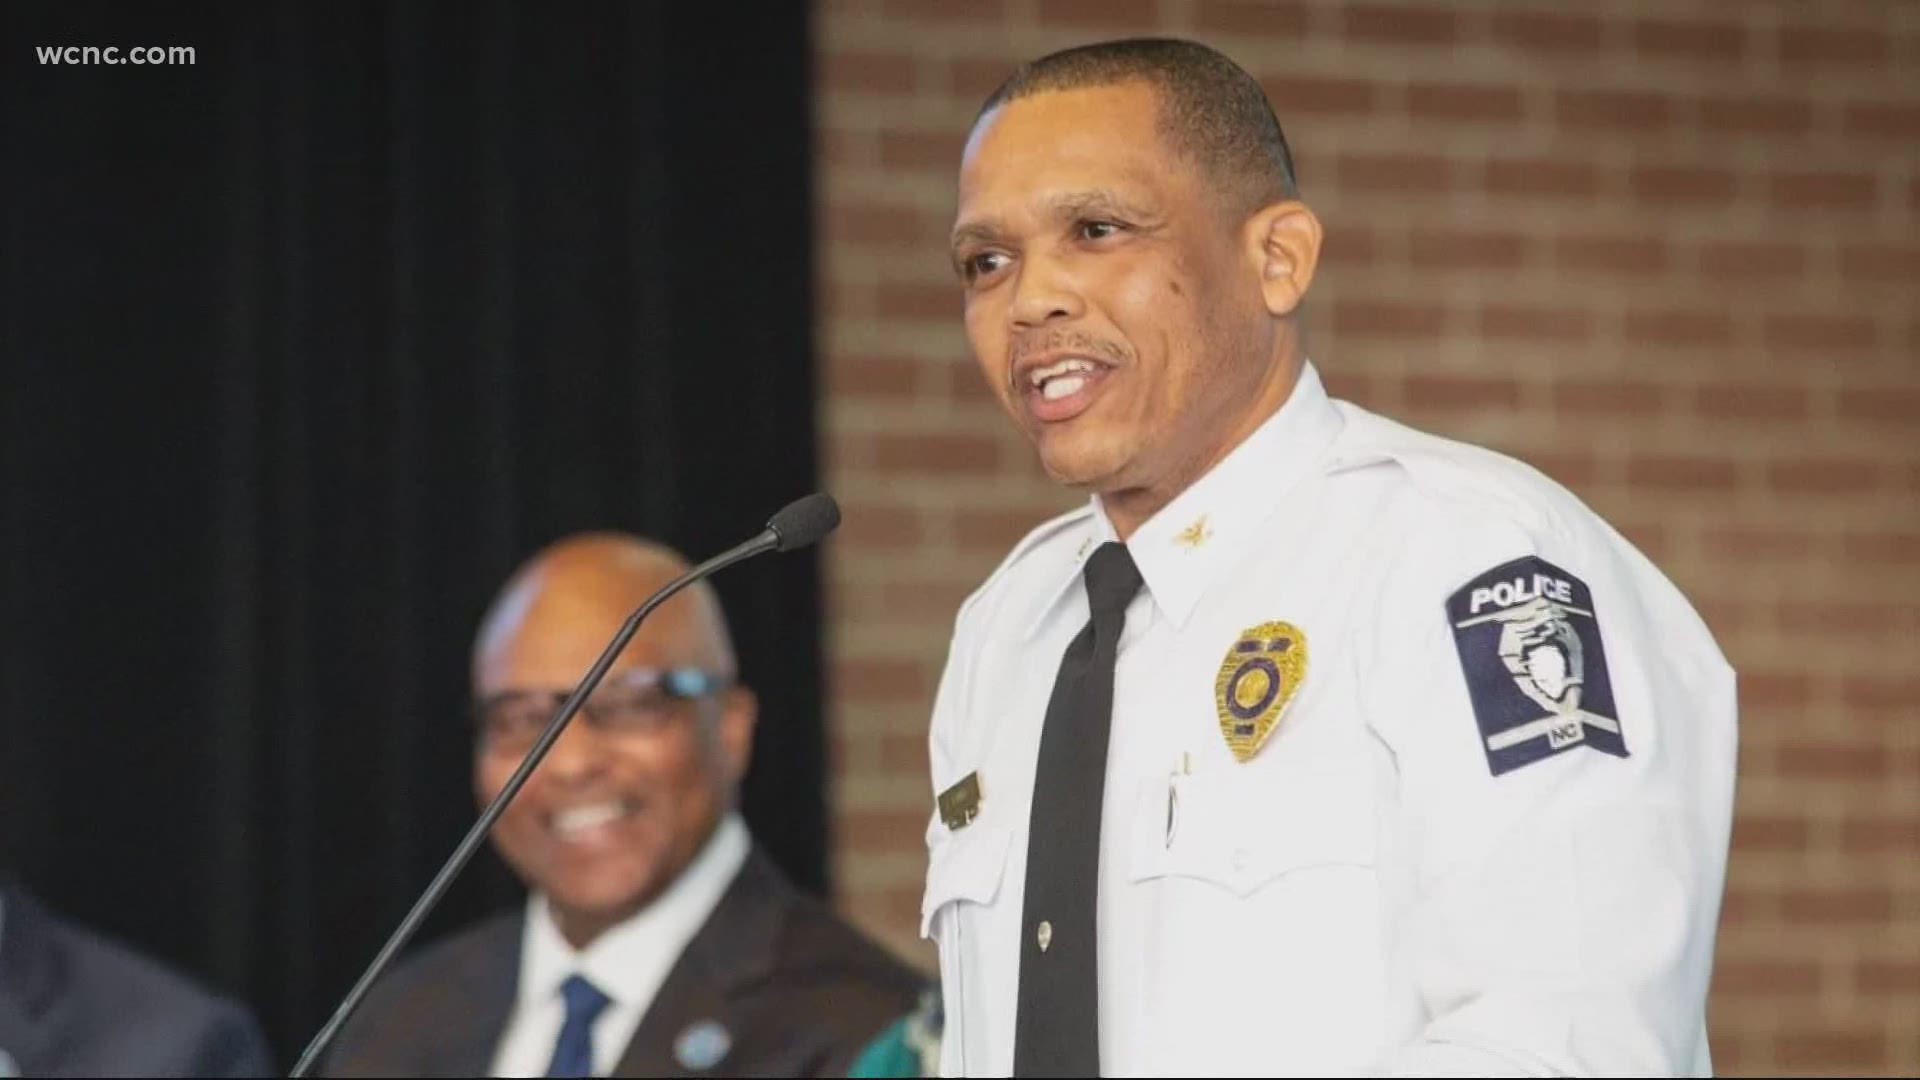 After a national search, CMPD hires from within and names Deputy Johnny Jennings the new Chief.